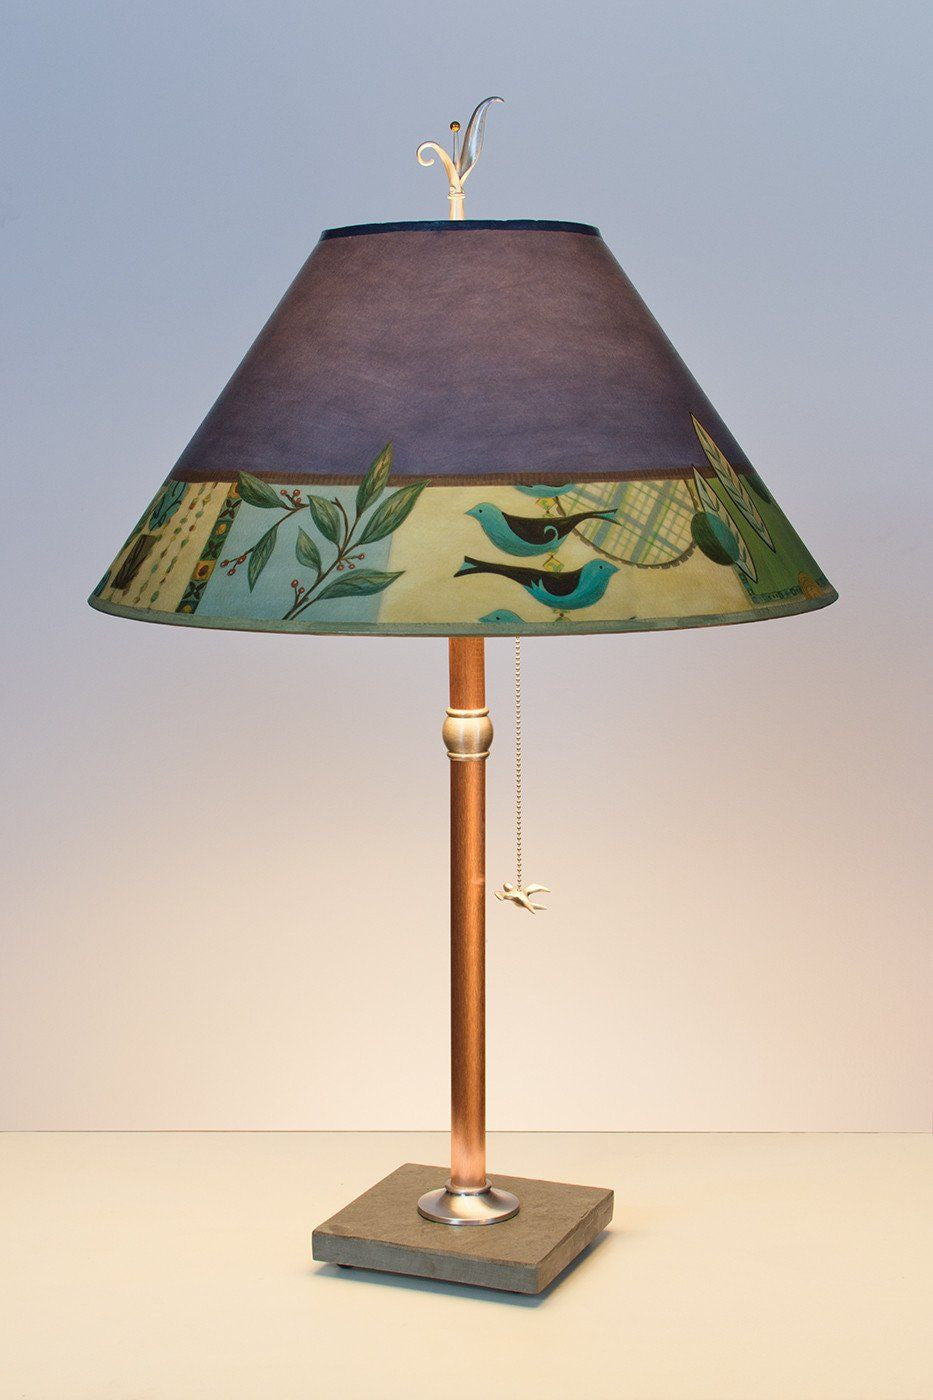 Janna Ugone & Co Table Lamps Copper Table Lamp with Large Conical Shade in New Capri Periwinkle